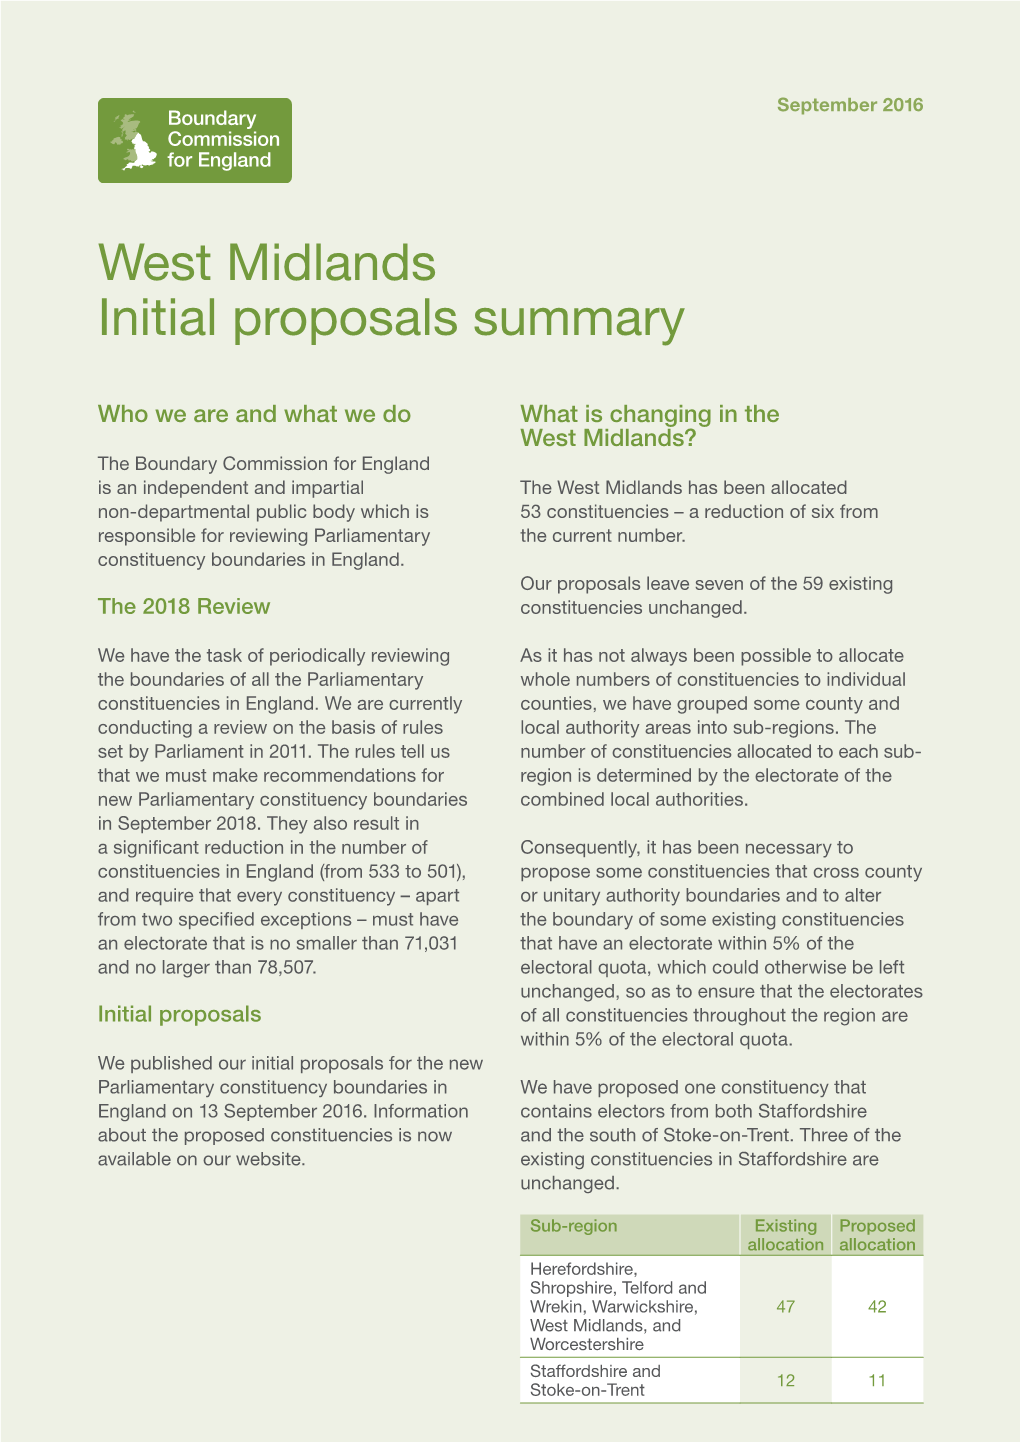 West Midlands Initial Proposals Summary